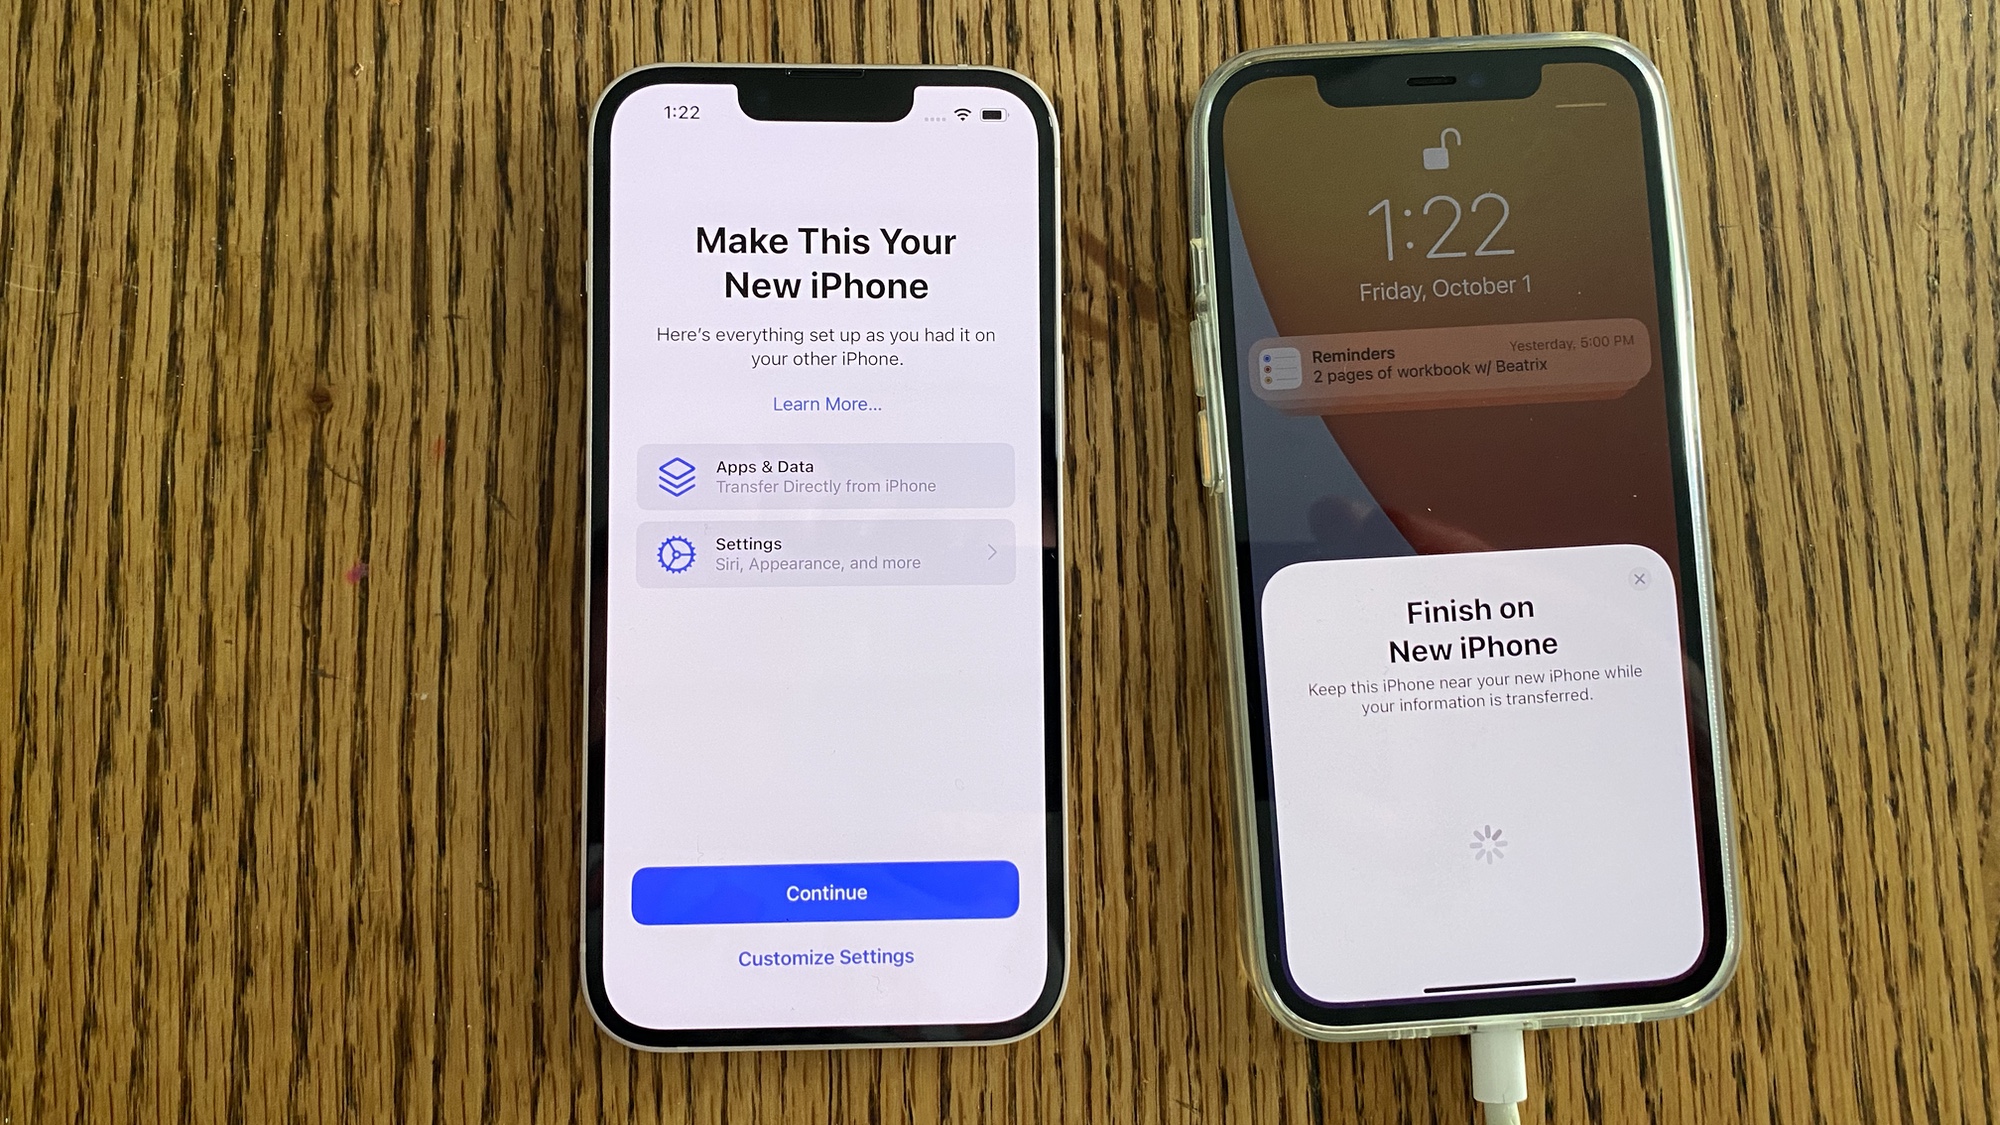 Quick Start will bring over apps and settings to set up your new iphone